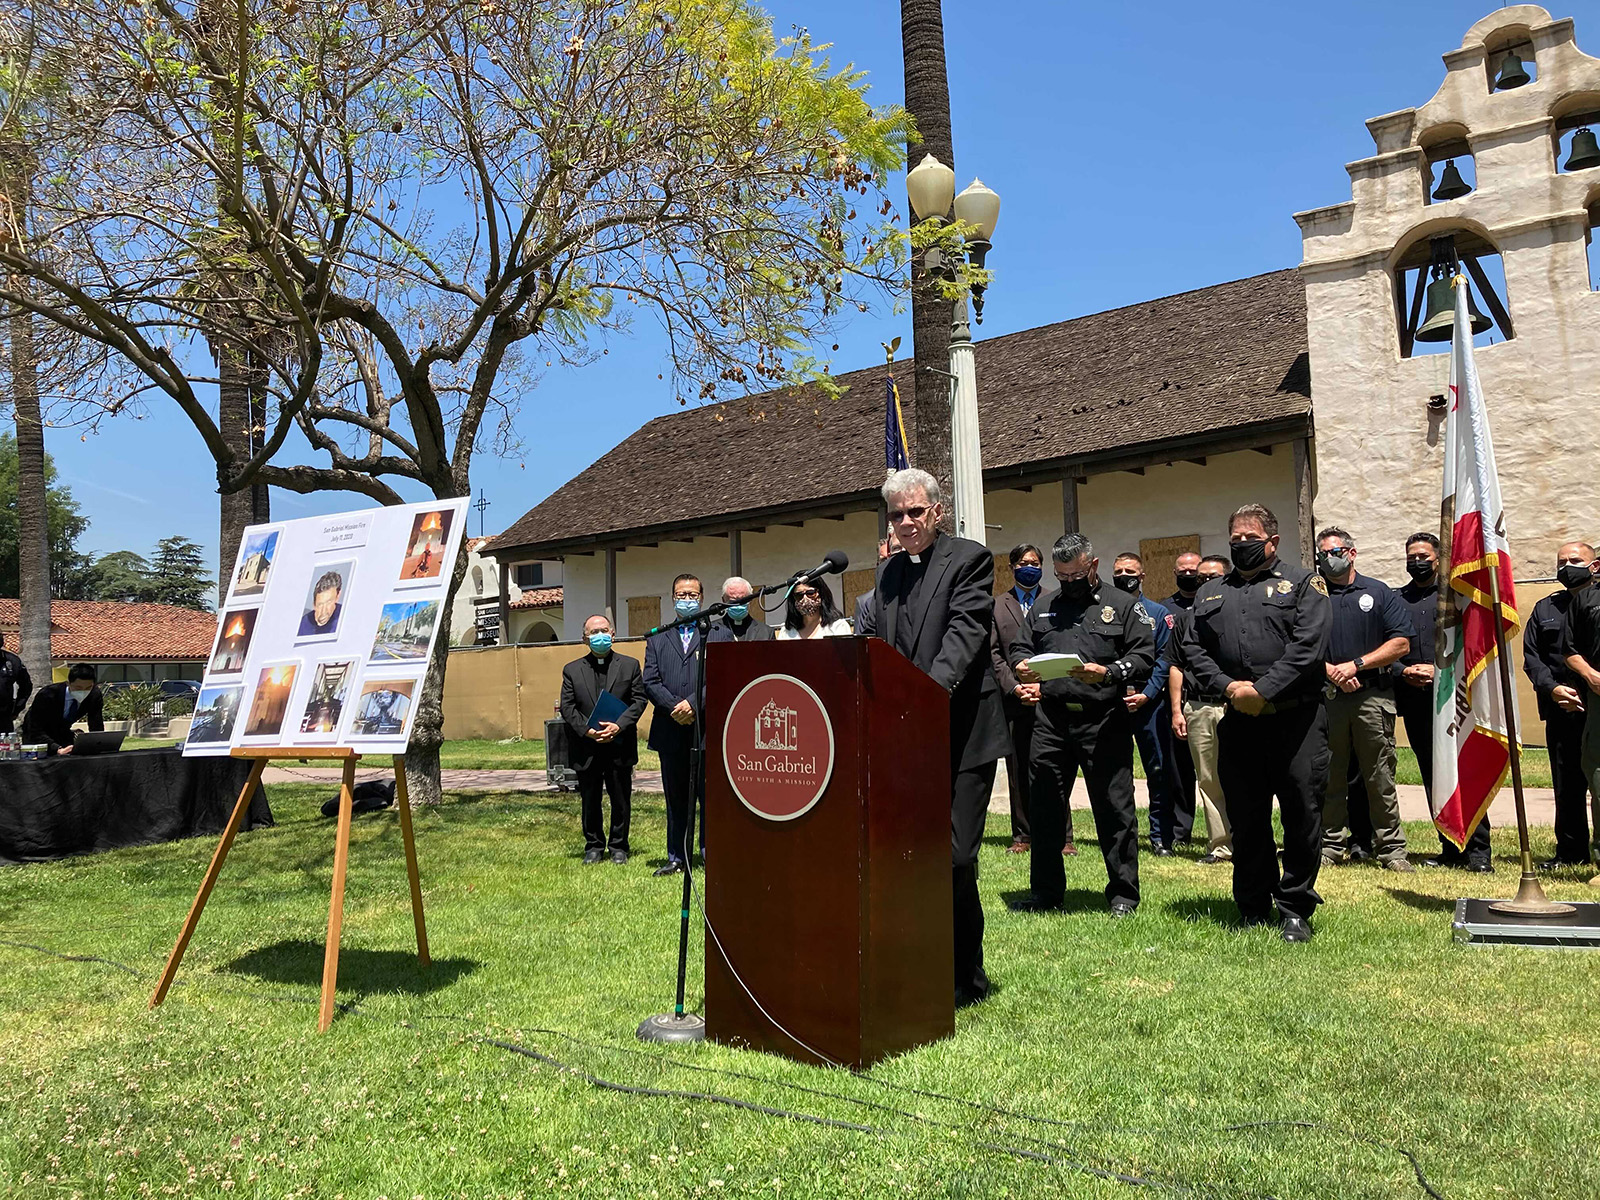 The Rev. John Molyneux, pastor of San Gabriel Mission, said the parish community had been “rocked by this incident,” during a press conference Tuesday, May 4, 2021, in San Gabriel, California. RNS photo by Alejandra Molina